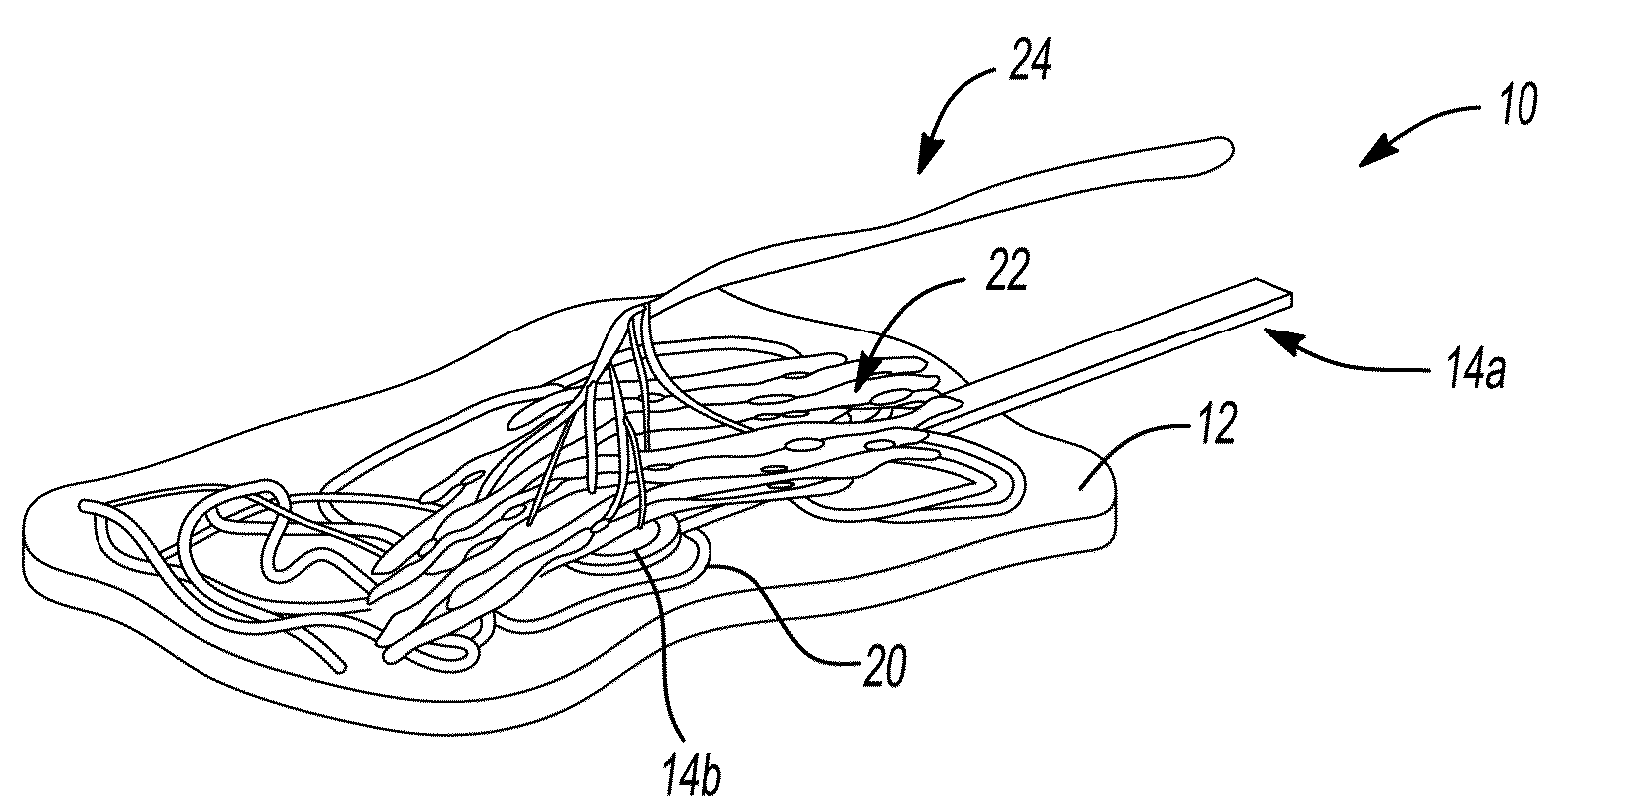 Peripheral nerve interface devices for treatment and prevention of neuromas